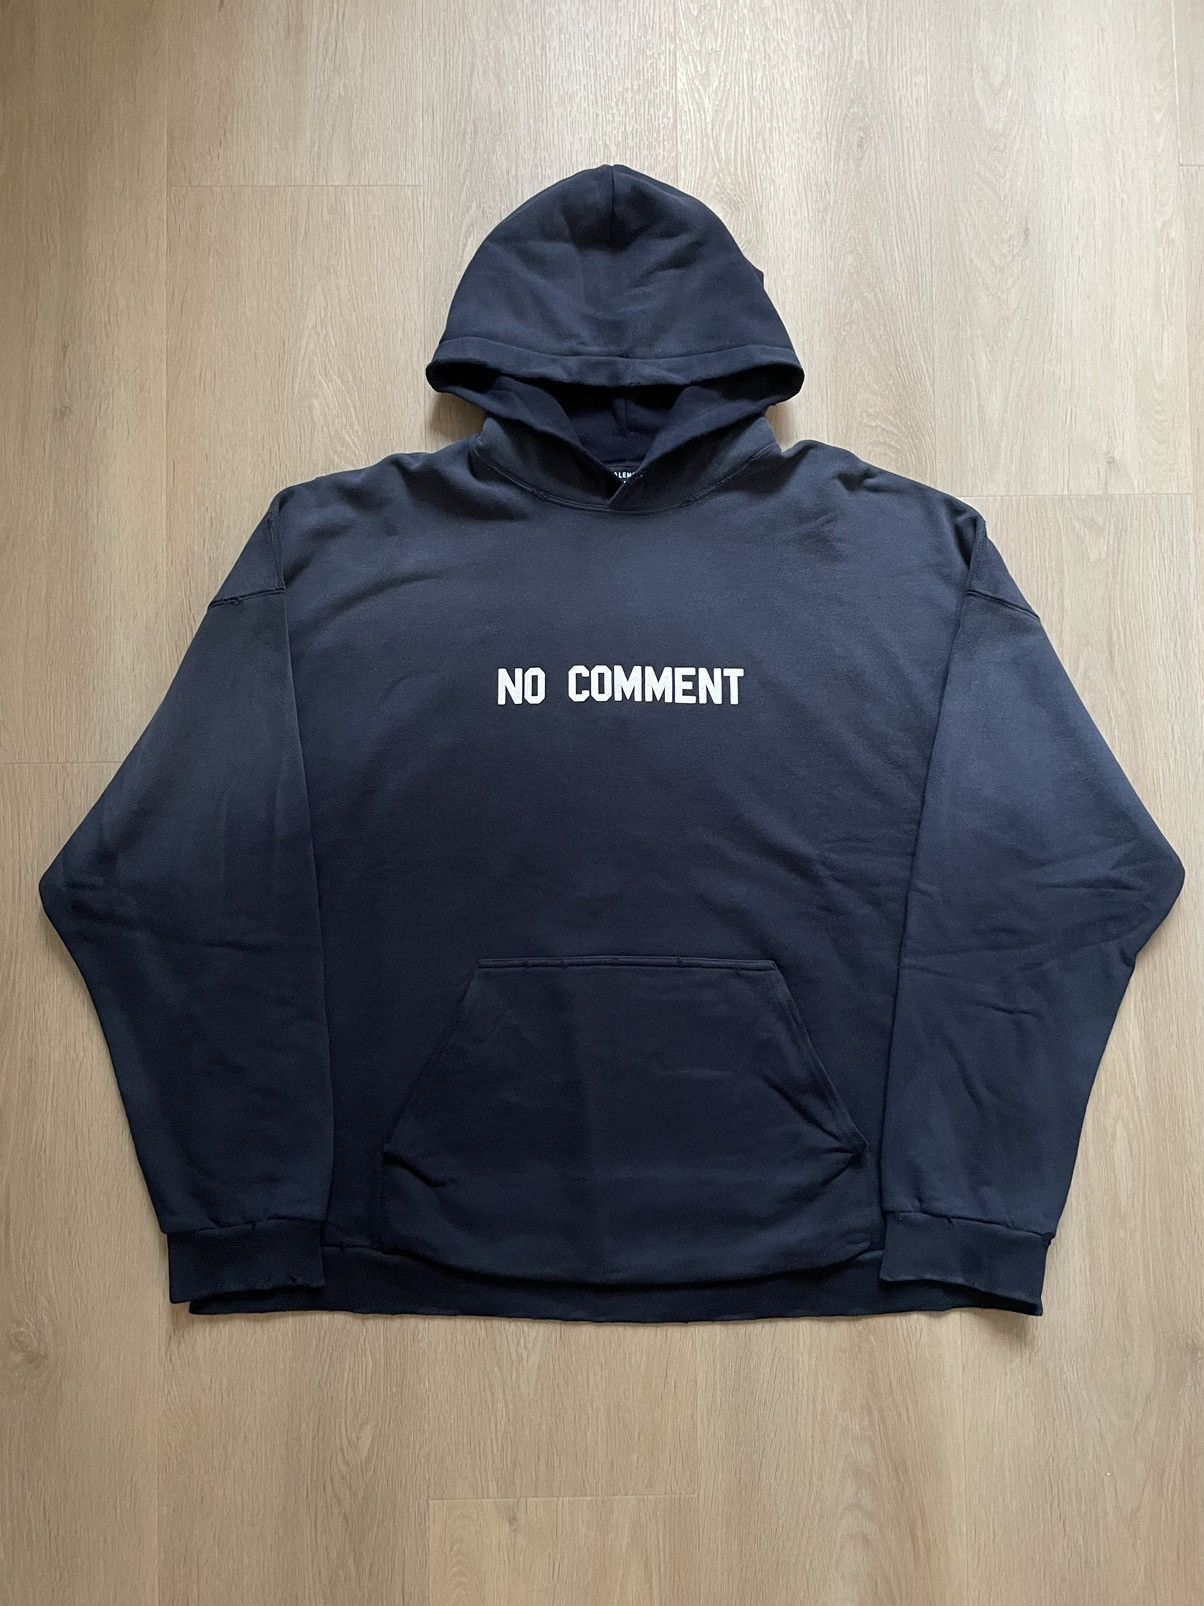 Balenciaga Spring 22 No Comment Wide Fit Hoodie | Grailed